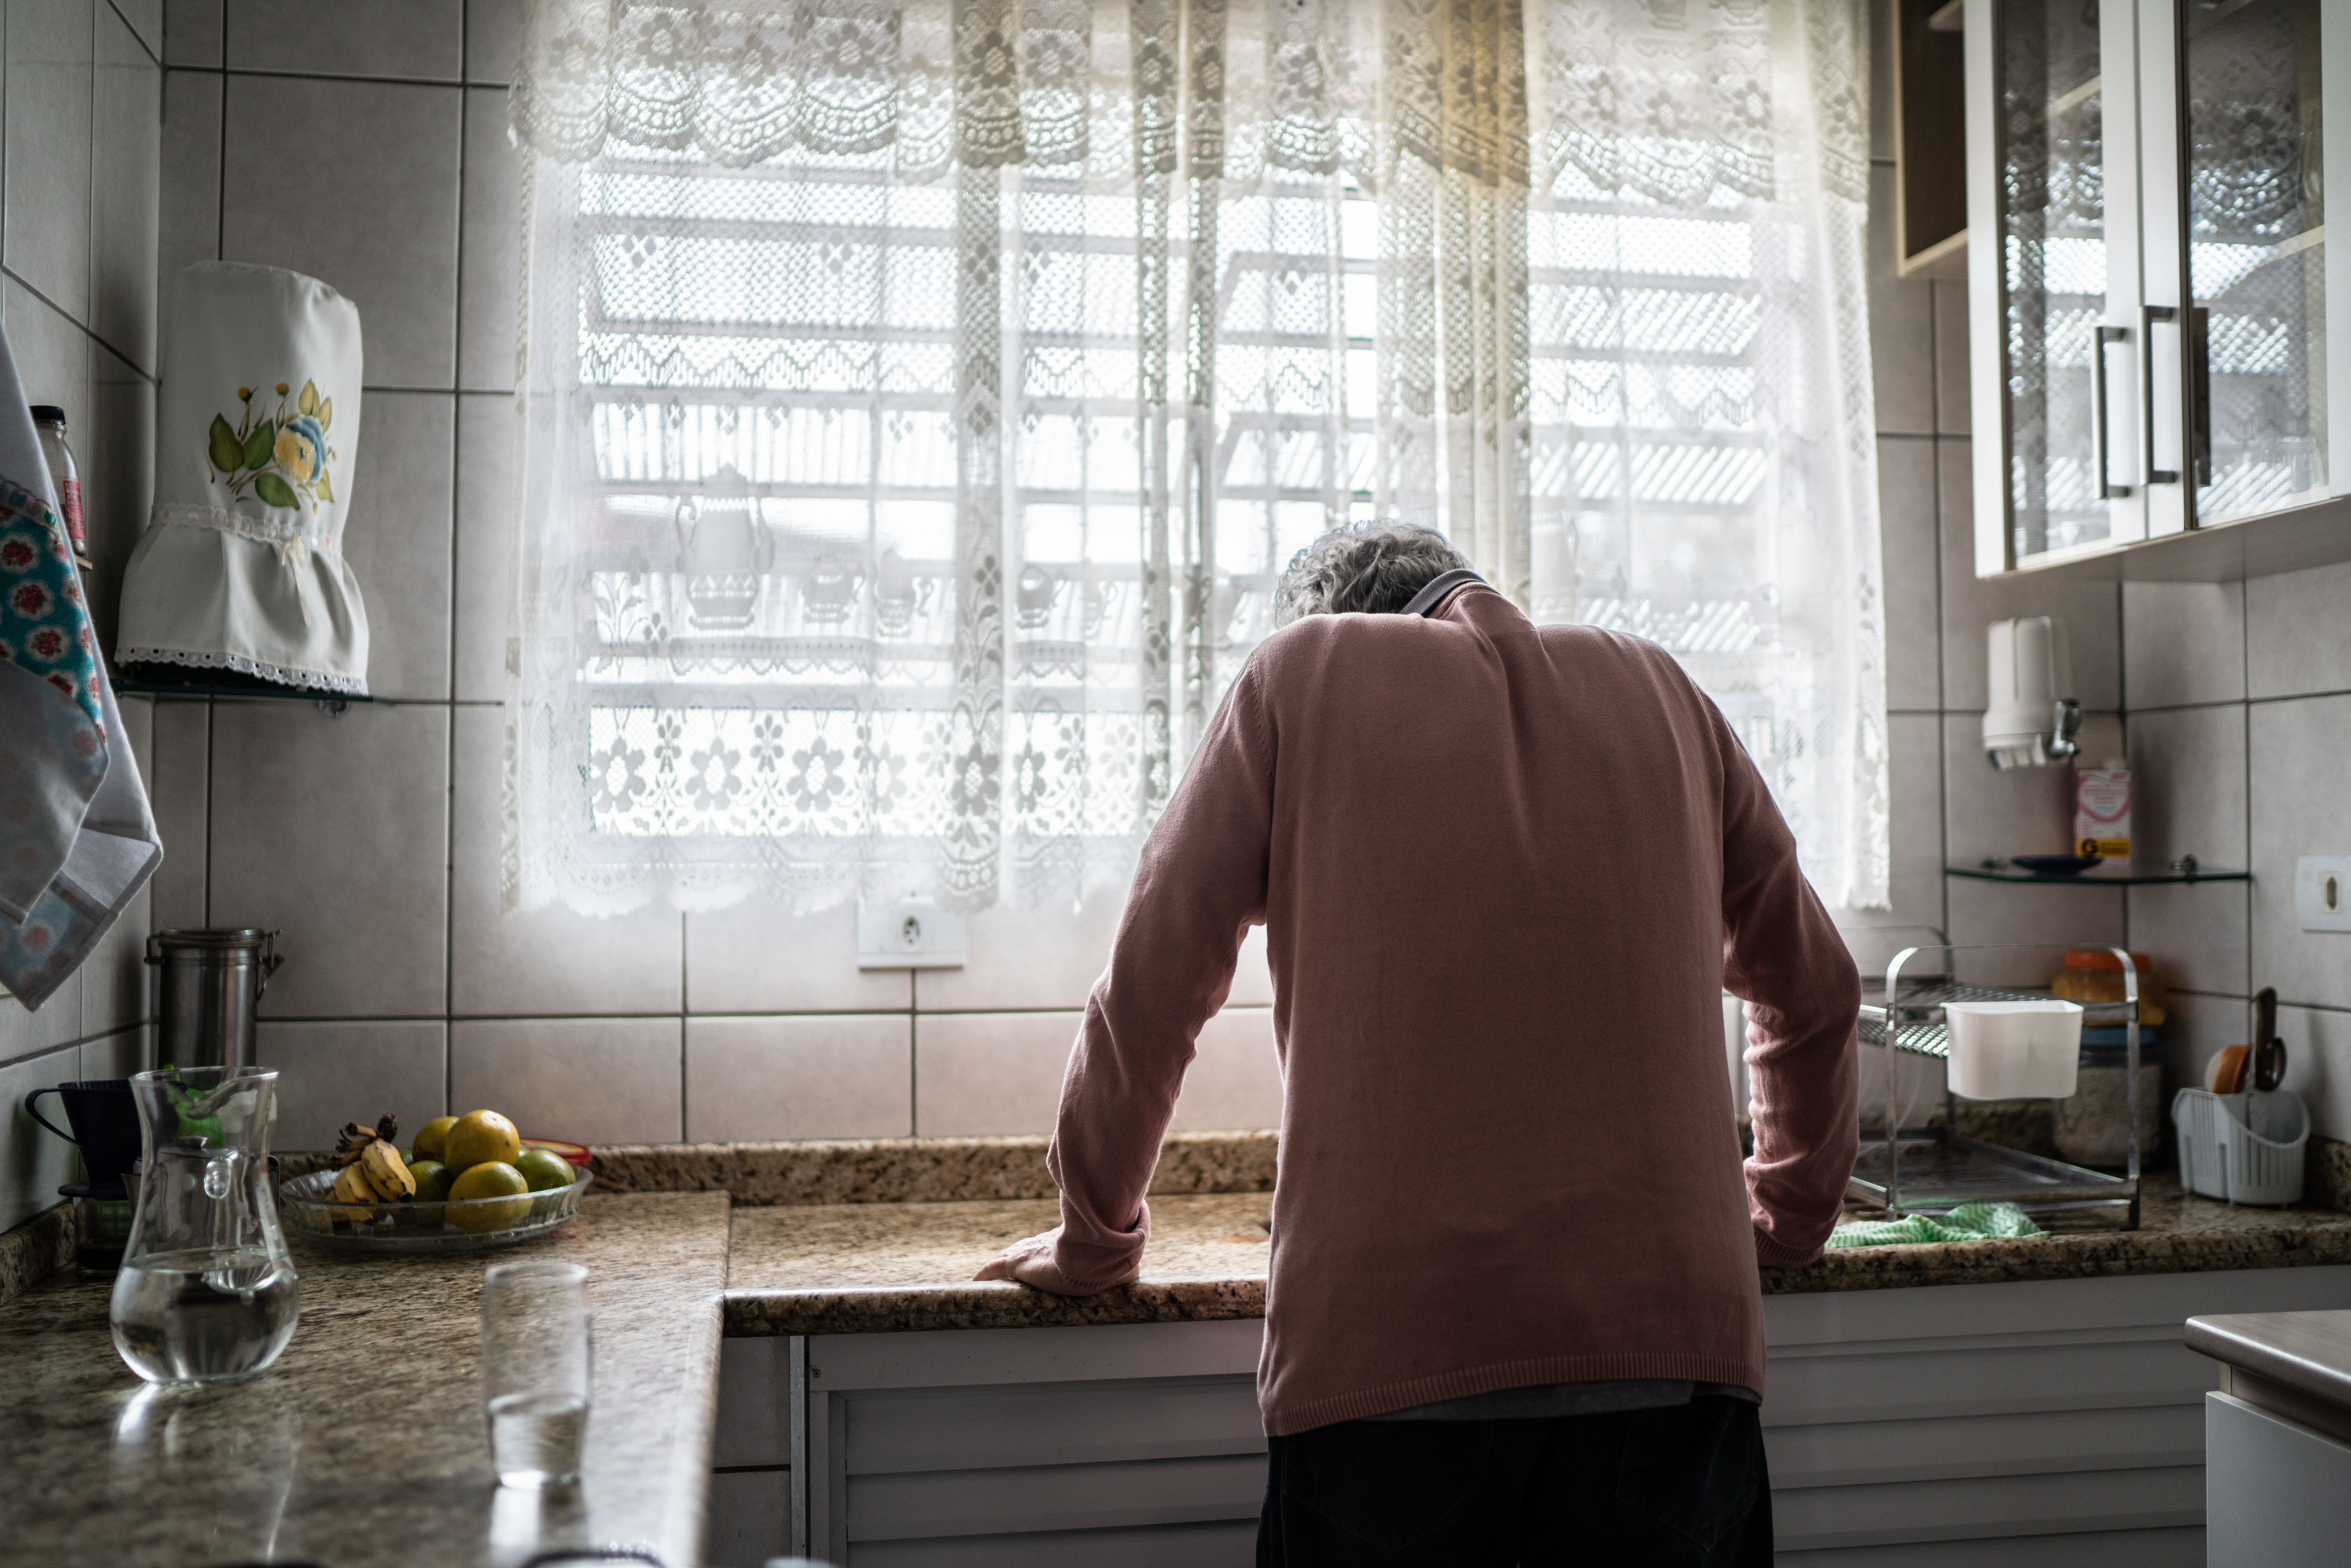 The reality of loneliness among Canada’s elderly. Why is it getting worse?